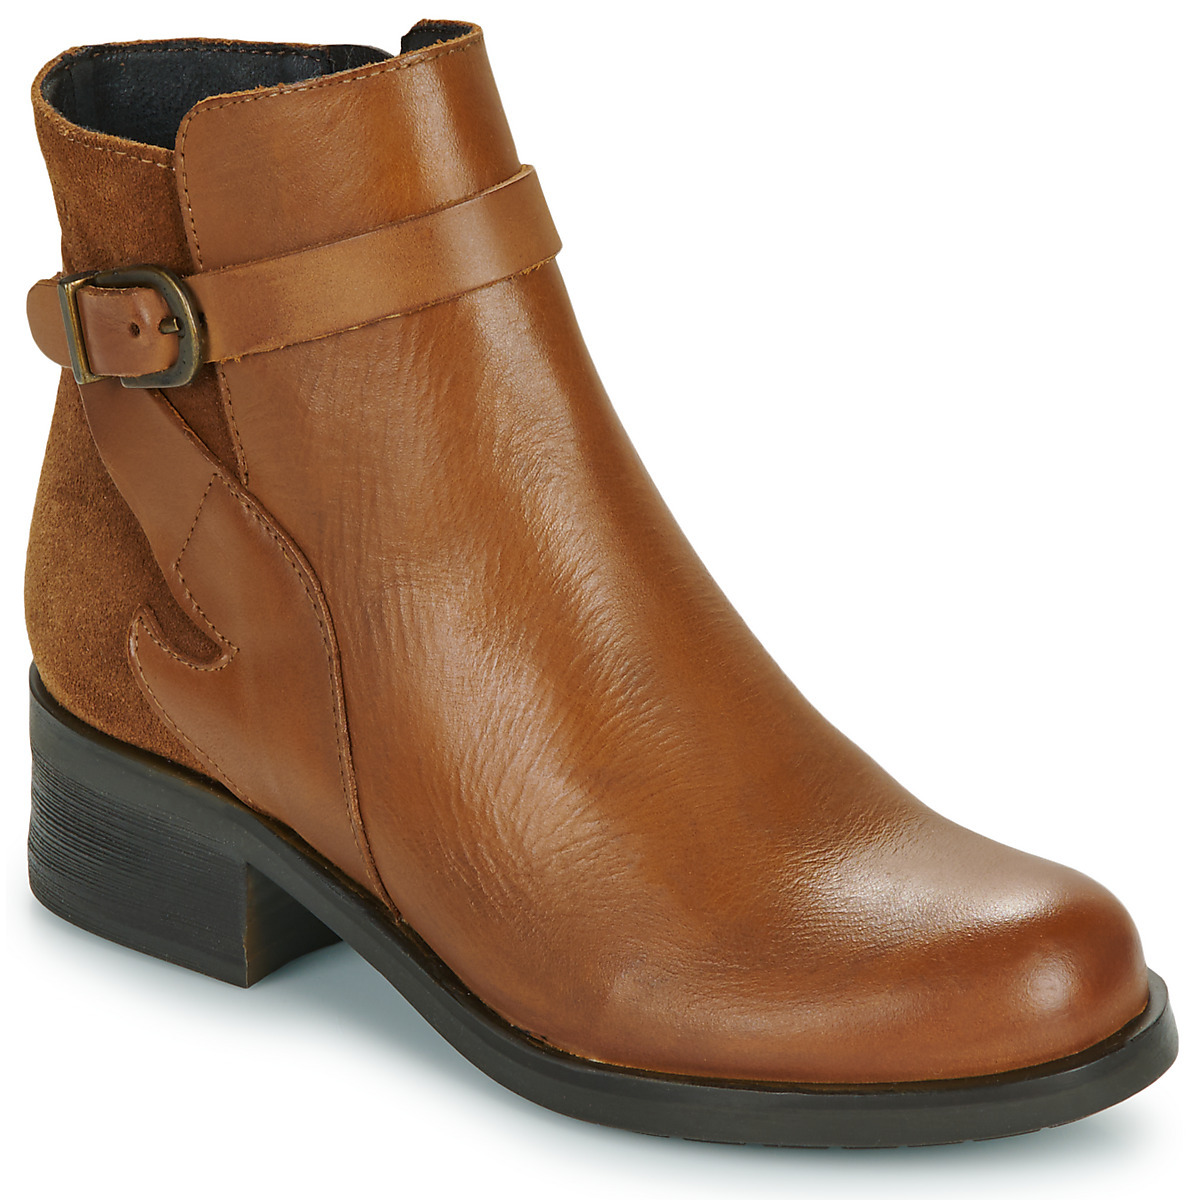 Ladies Ankle Boots in Brown Betty London Spartoo GOOFASH